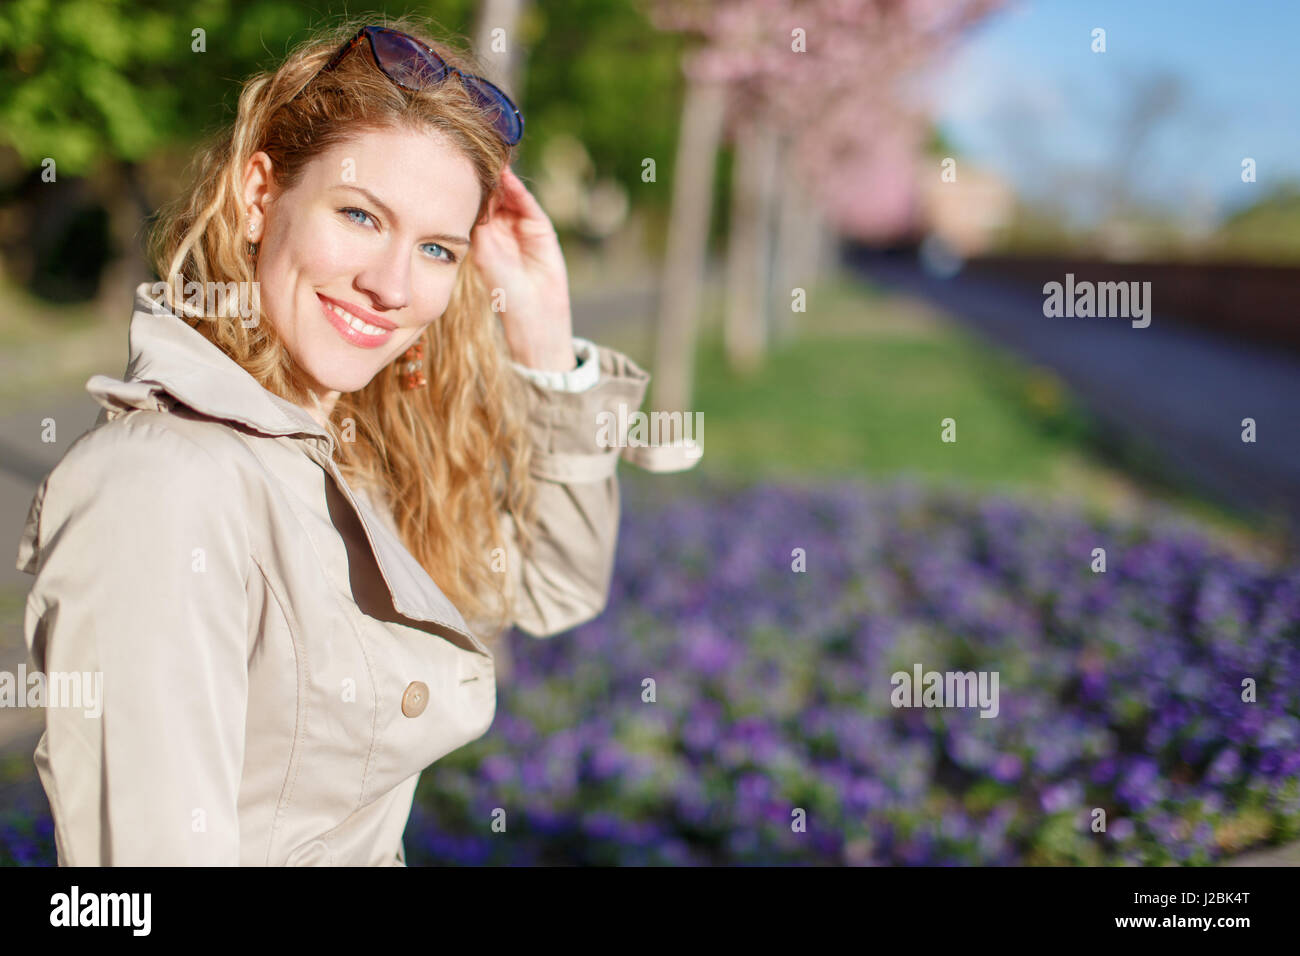 Young natural woman holding sunglasses in park at spring Stock Photo